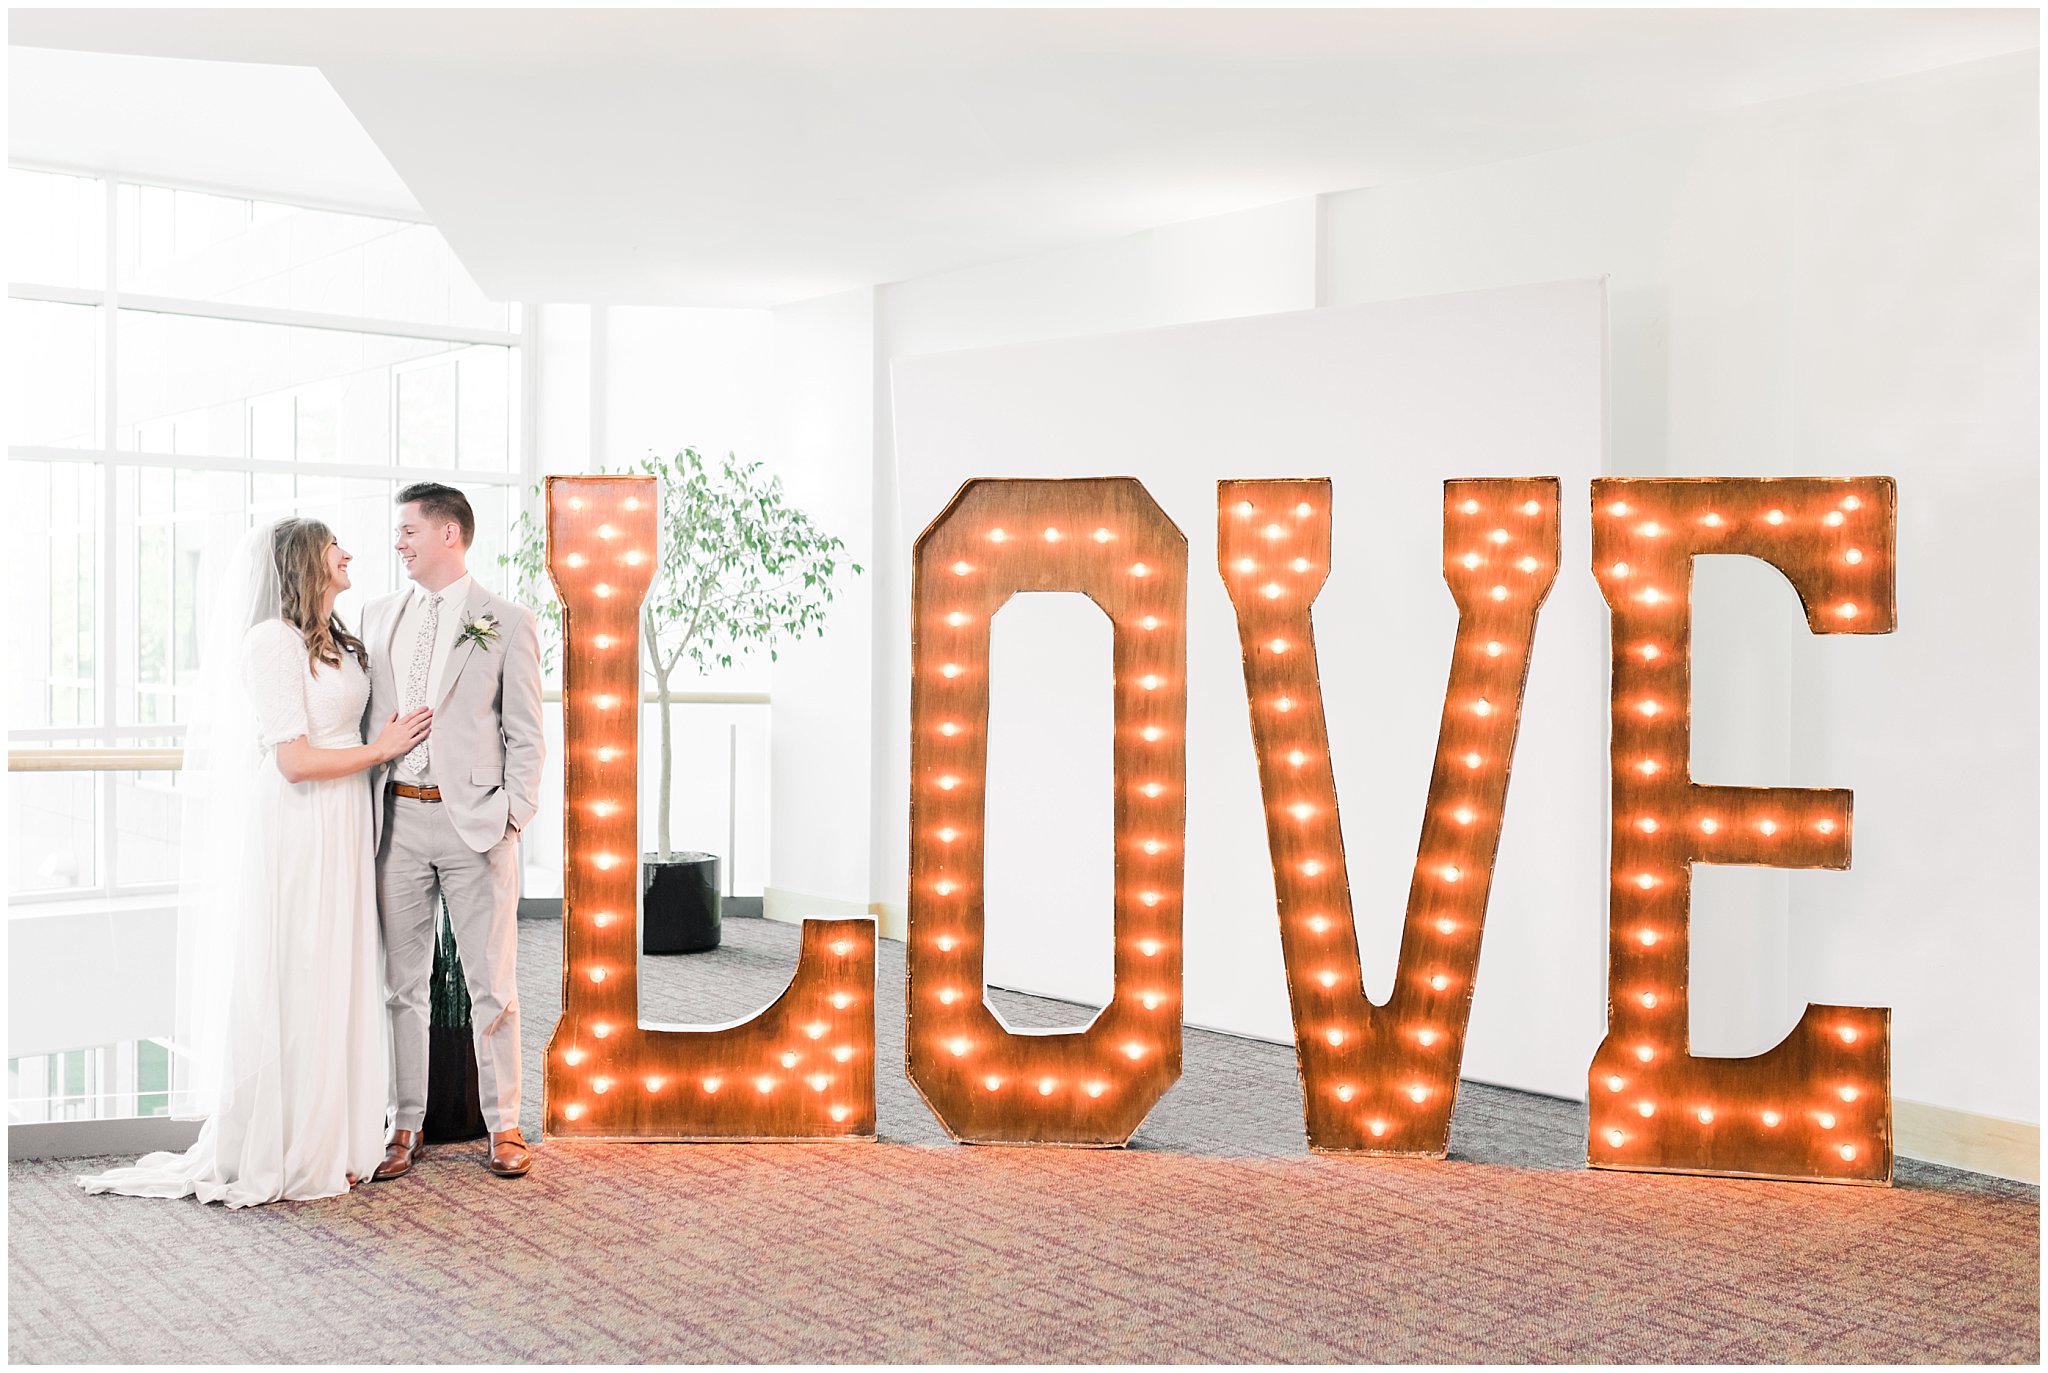 Bride and Groom in front of LOVE sign reception decor | Salt Lake Temple Wedding and Clearfield City Hall Reception | Utah Wedding Photographers | Jessie and Dallin Photography